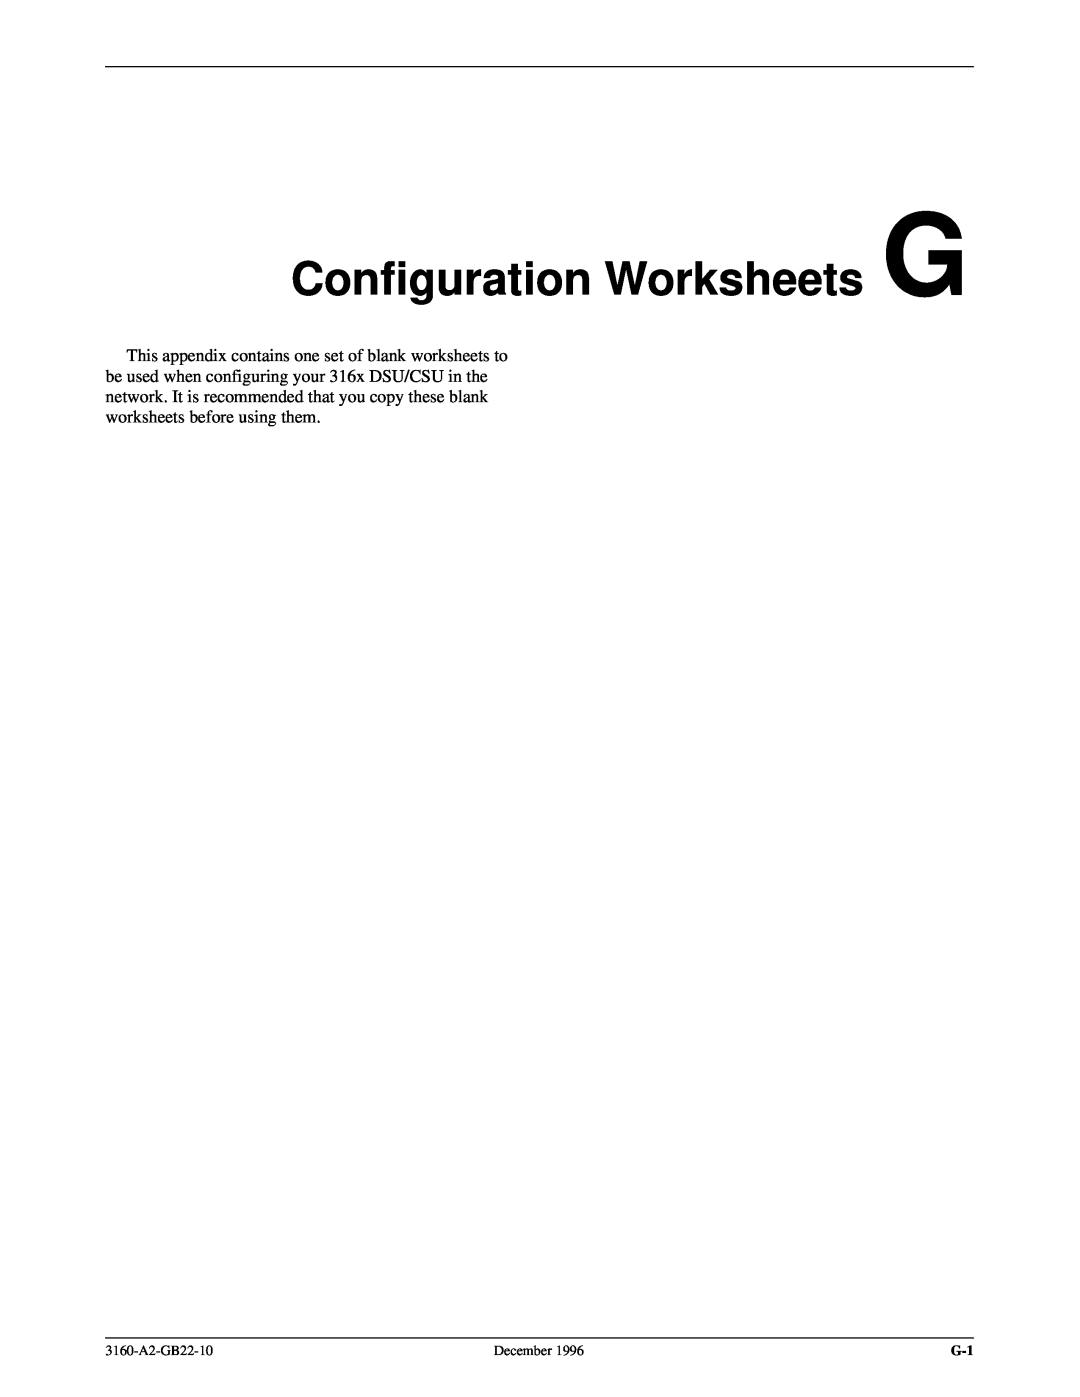 Paradyne 316x manual Configuration Worksheets G, 3160-A2-GB22-10, December 